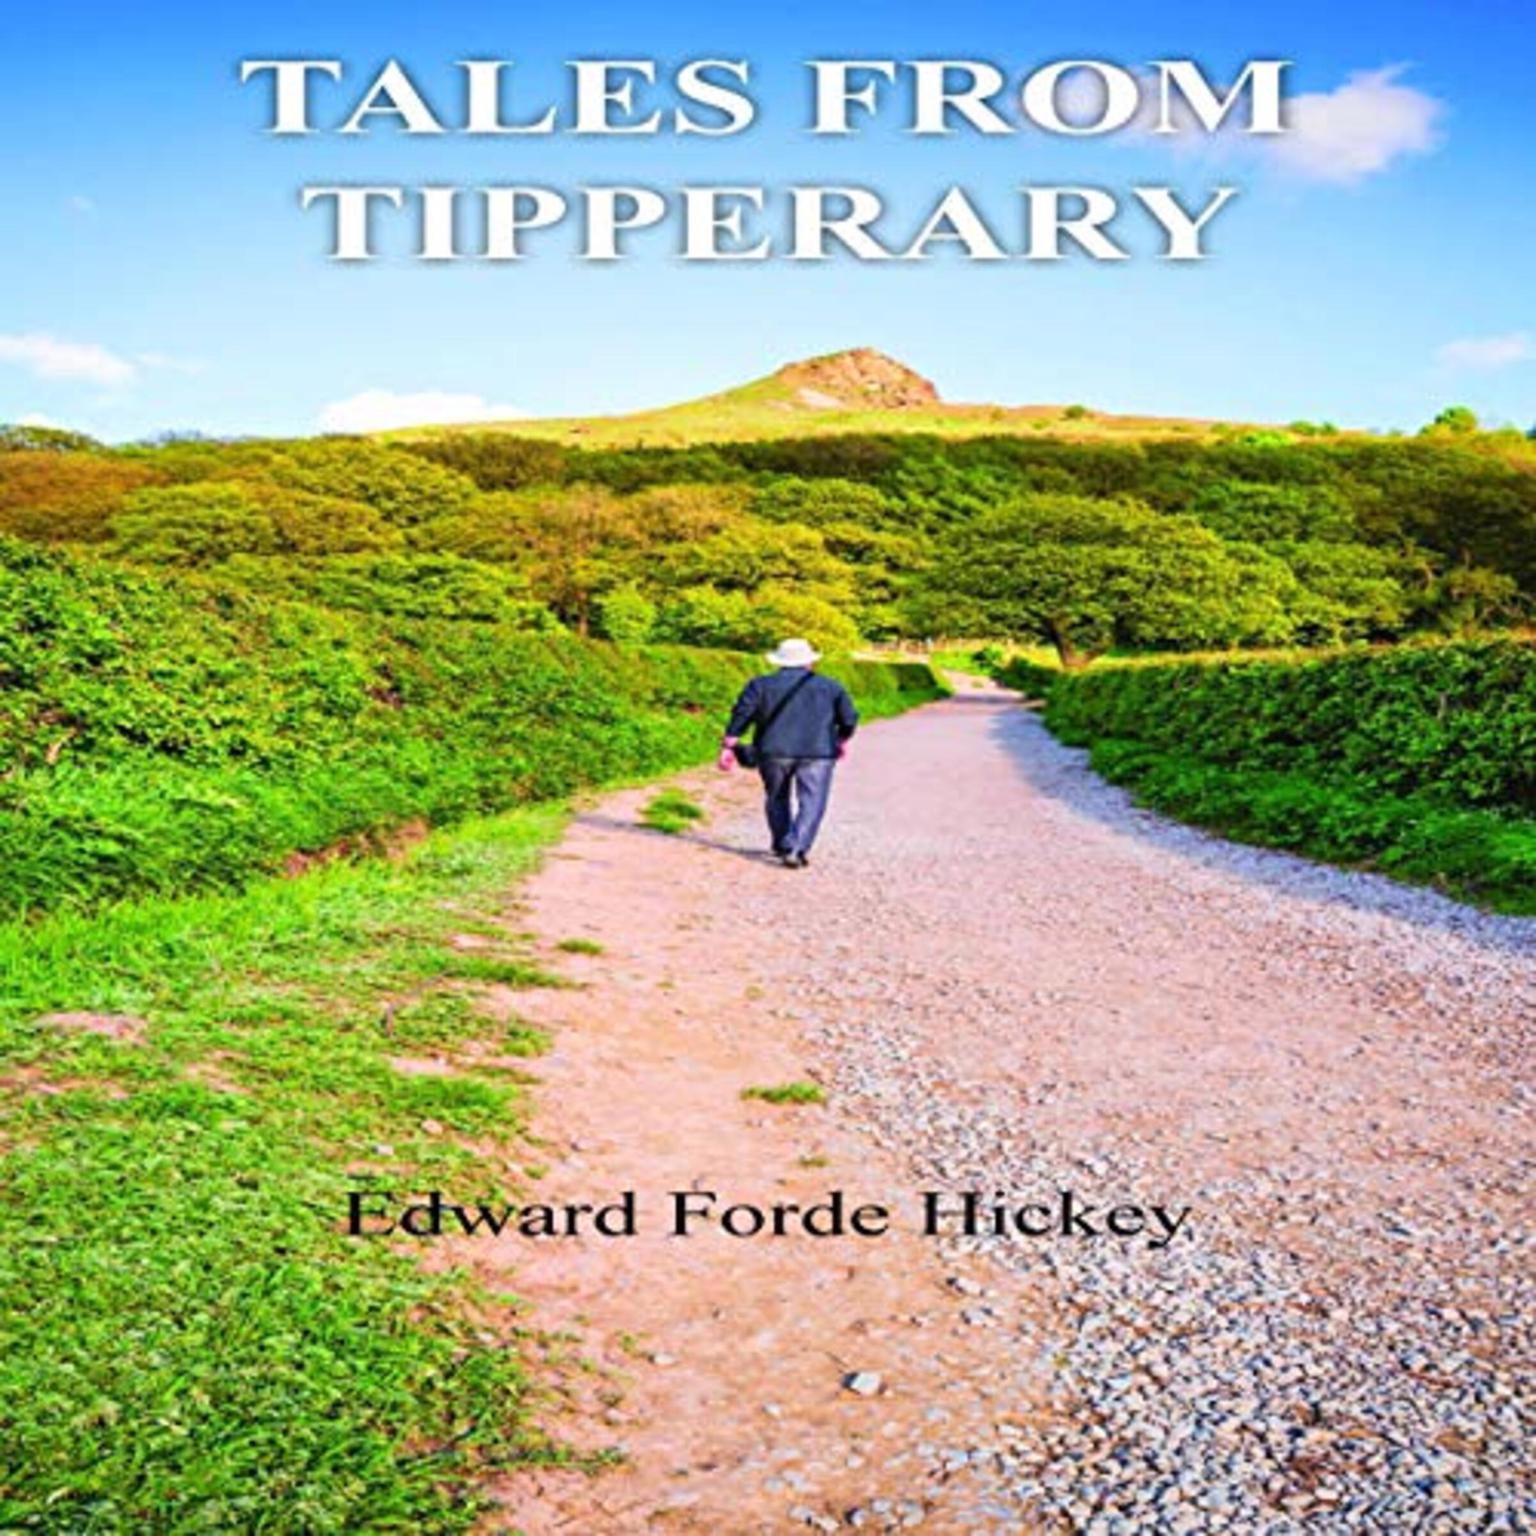 Tales from Tipperary Audiobook, by Edward Forde Hickey